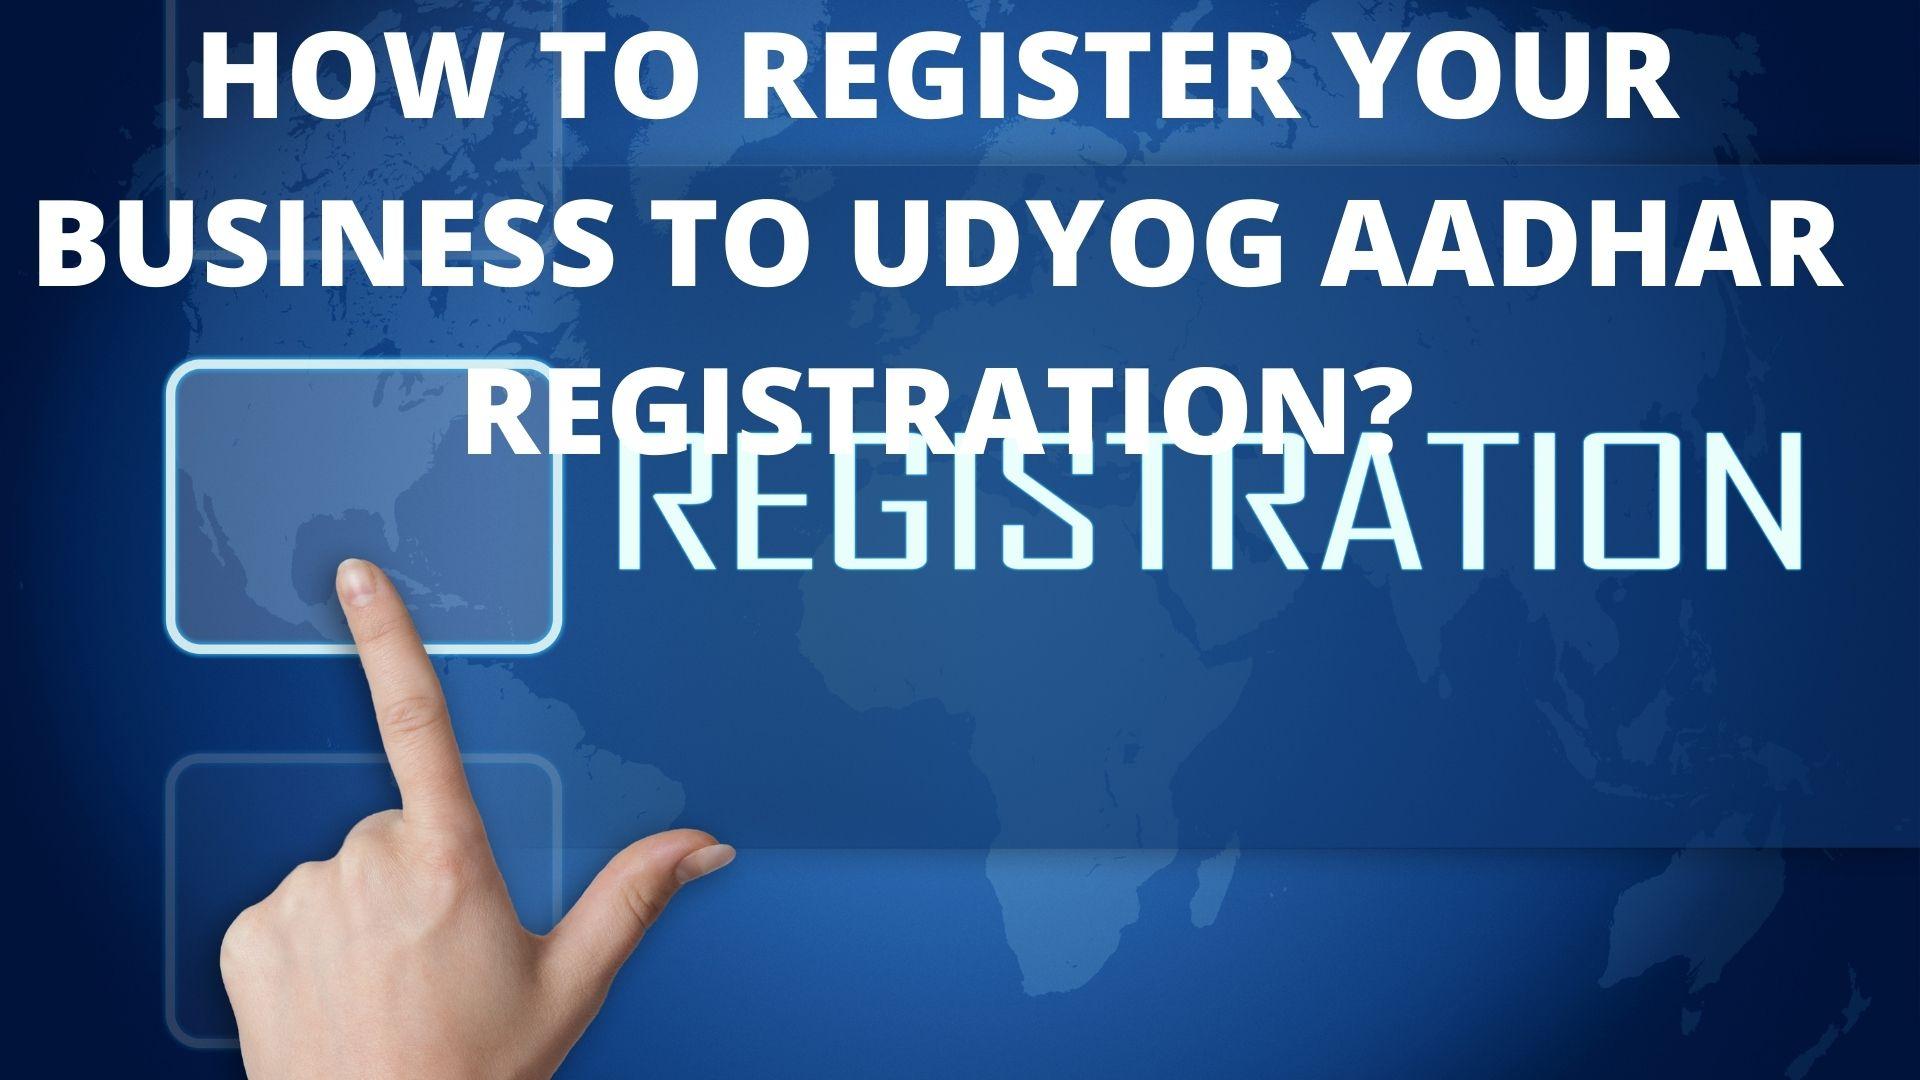 HOW TO REGISTER YOUR BUSINESS TO UDYOG AADHAR REGISTRATION